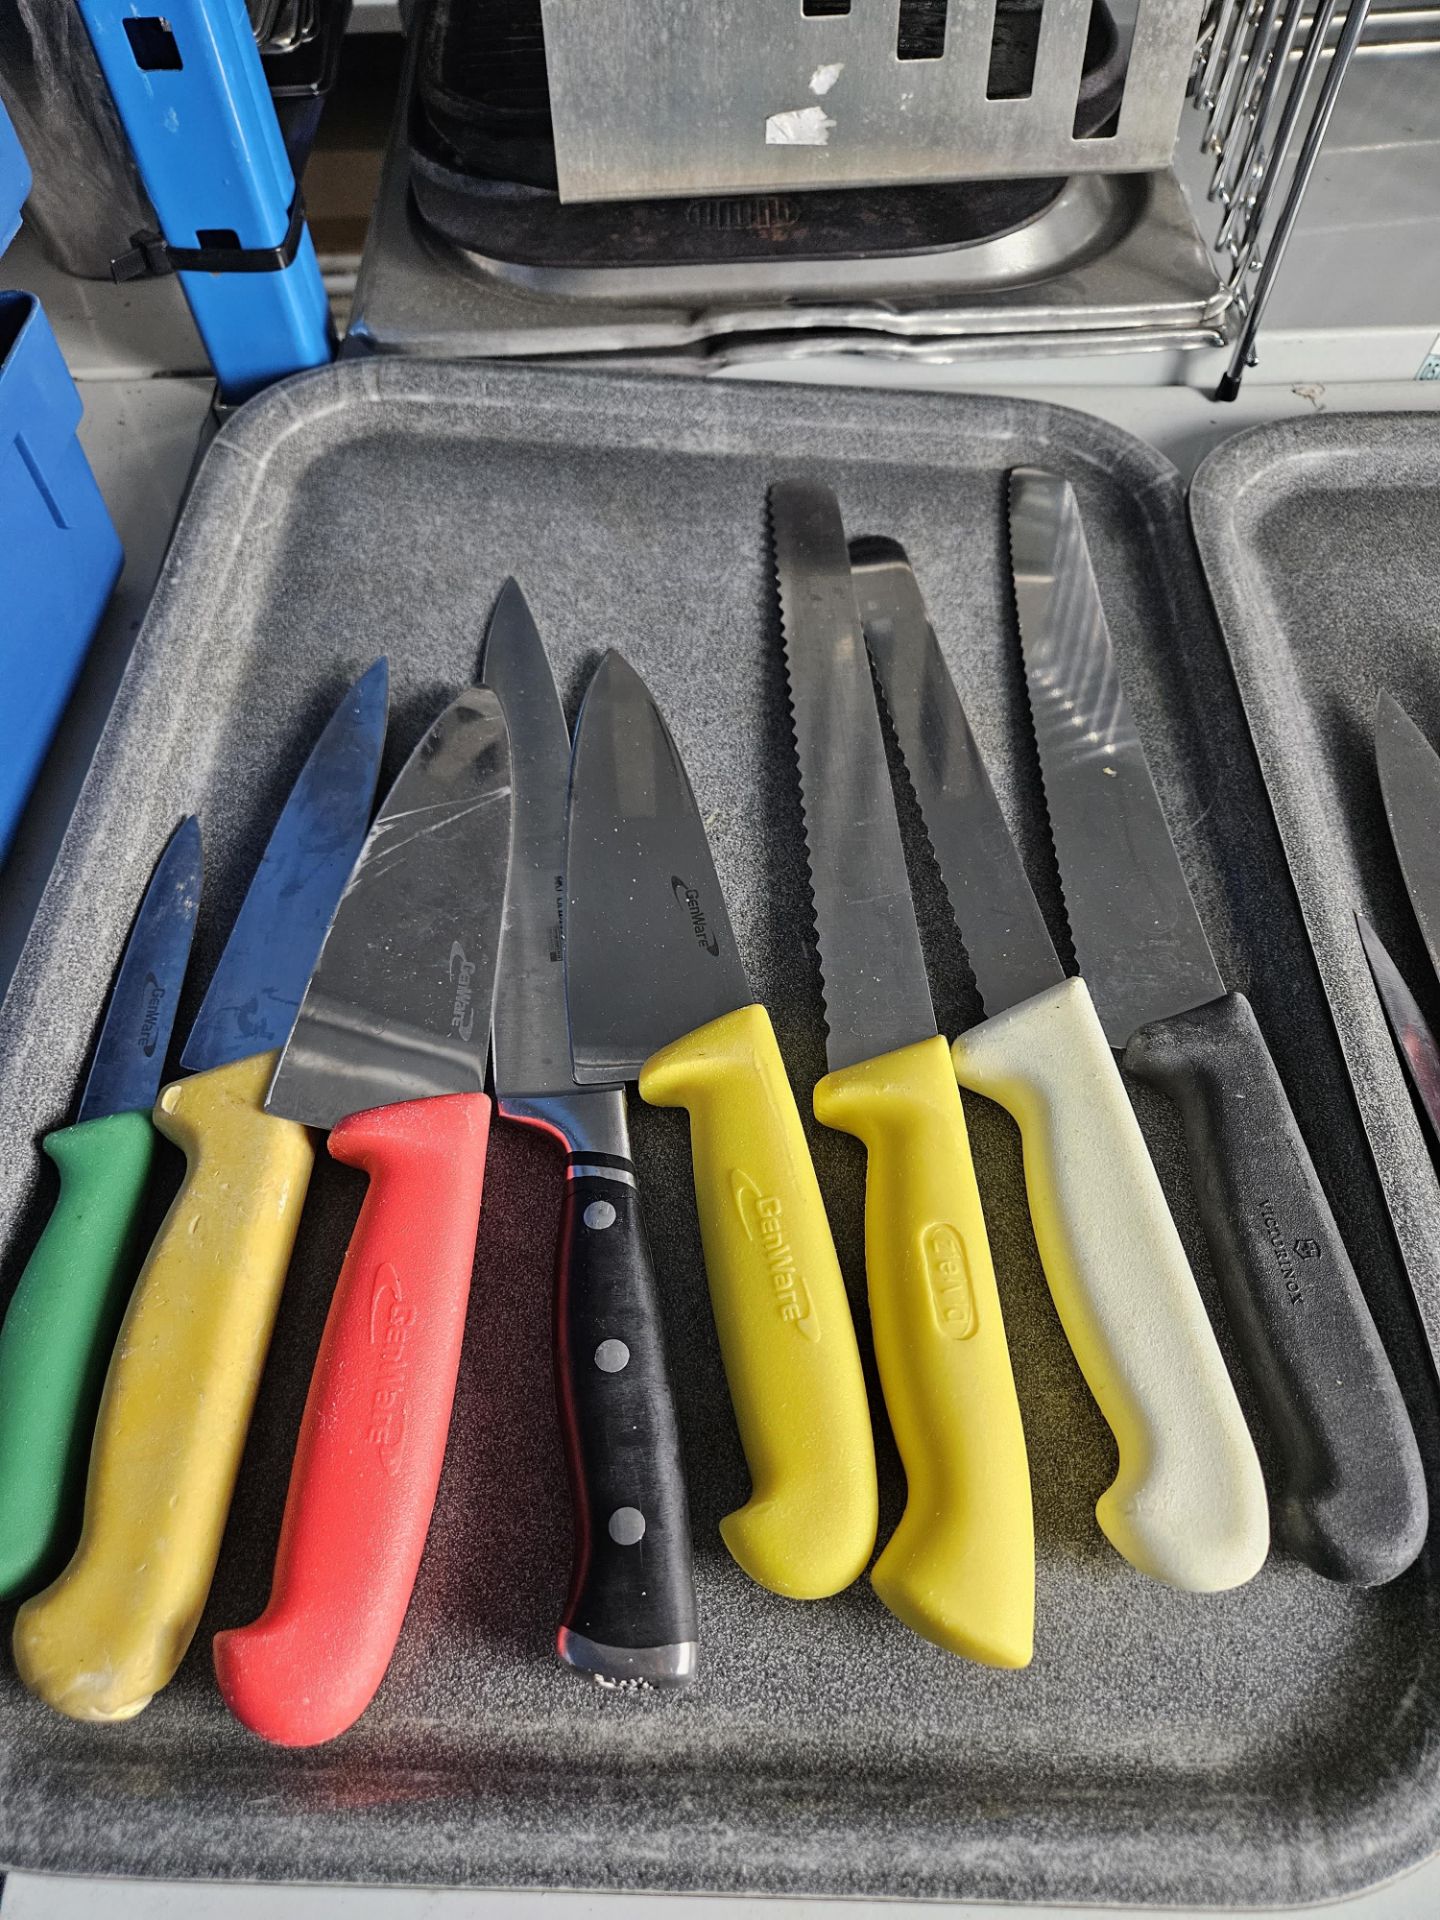 Selection of Chef Knives